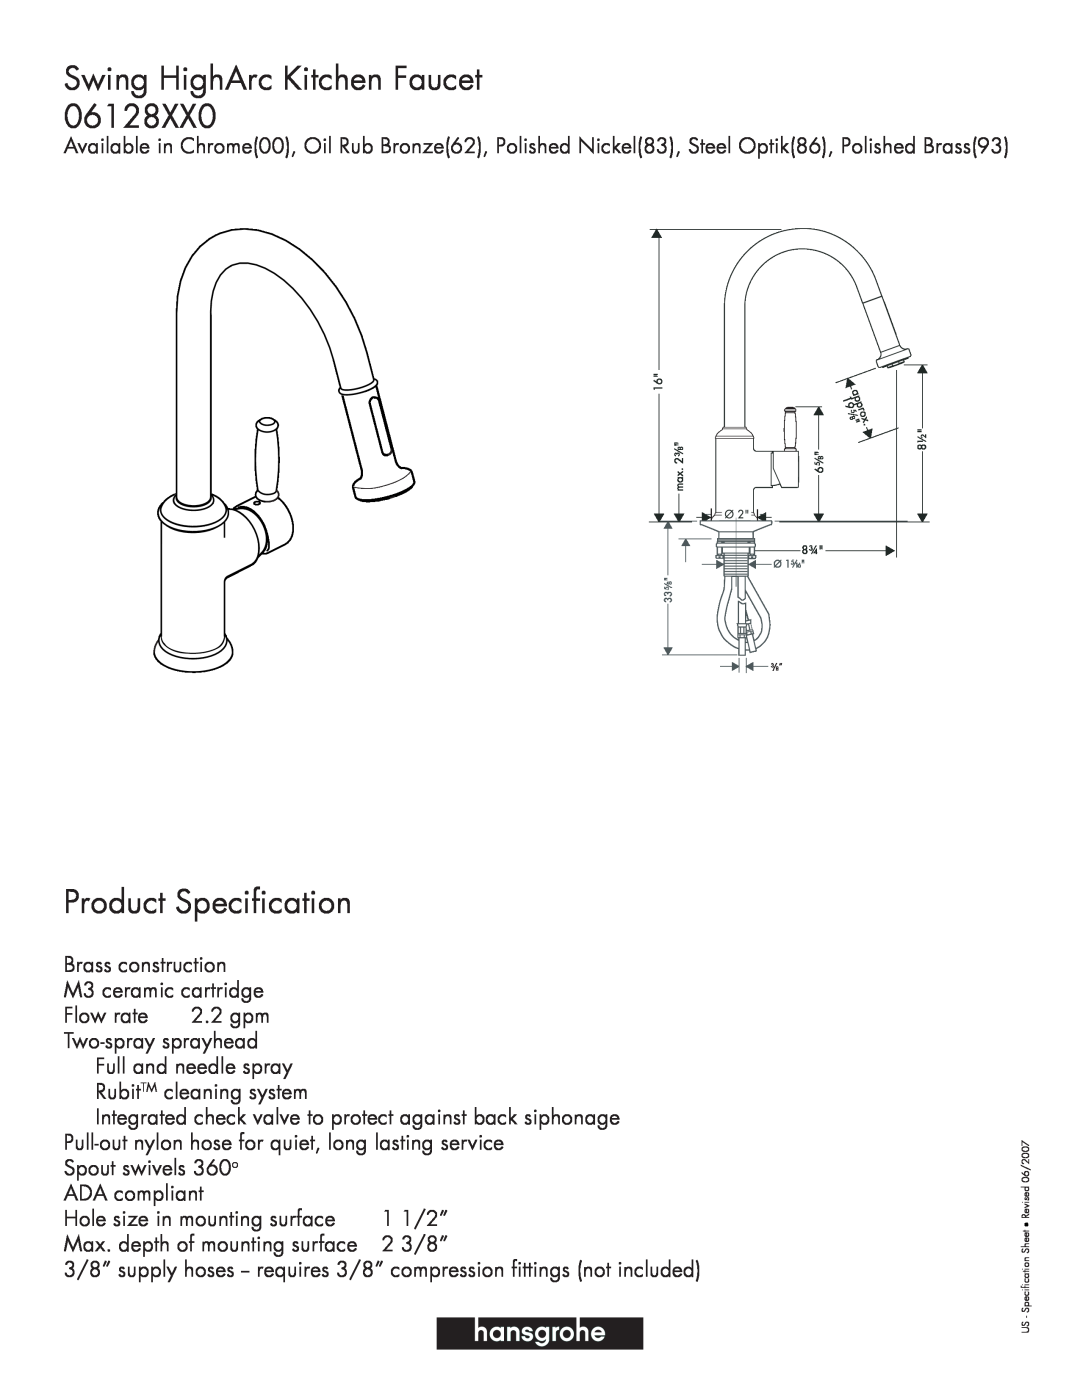 Hans Grohe 06128XX0 specifications Swing HighArc Kitchen Faucet, Product Specification 